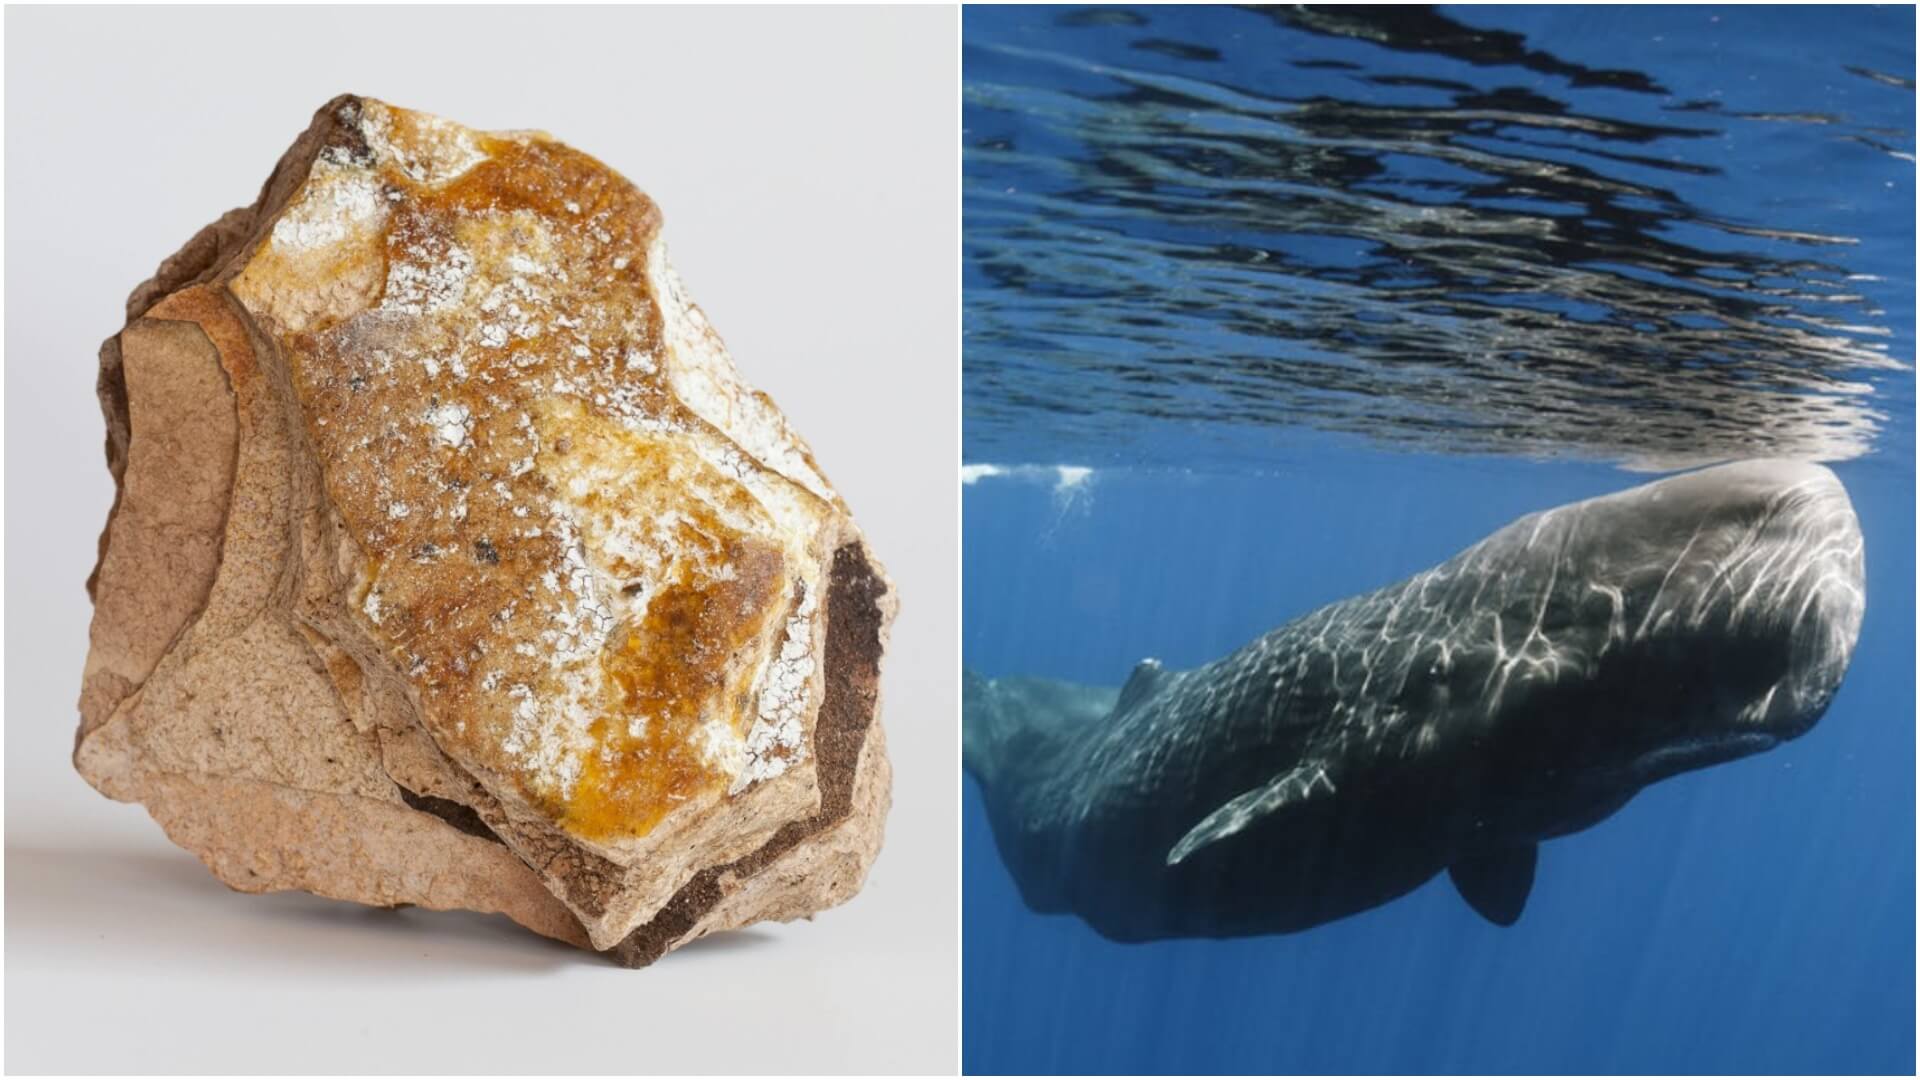 What makes Whale Vomit so costly?